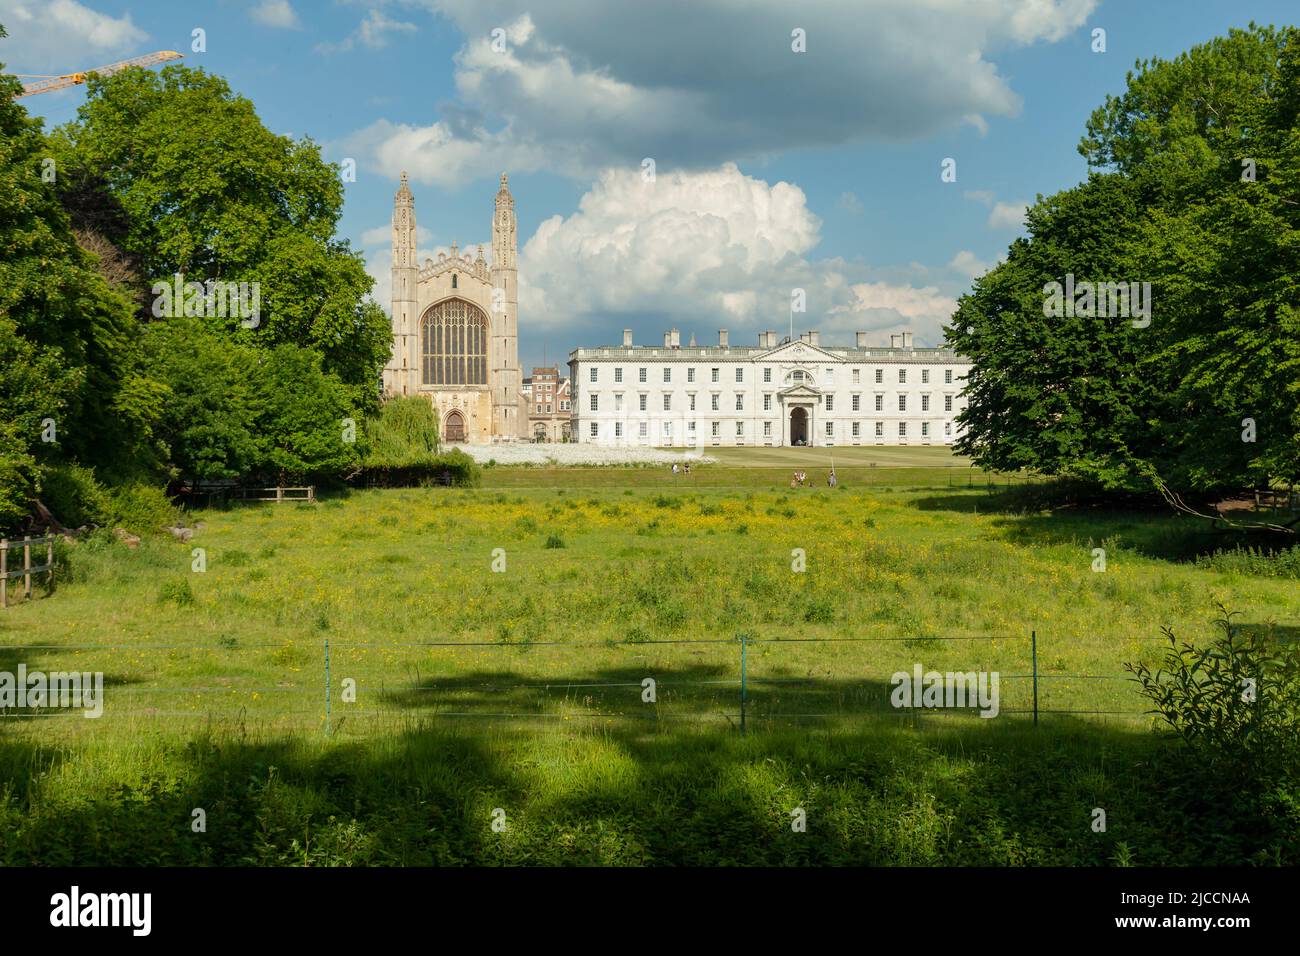 King's College seen from the Backs in Cambridge, England. Stock Photo